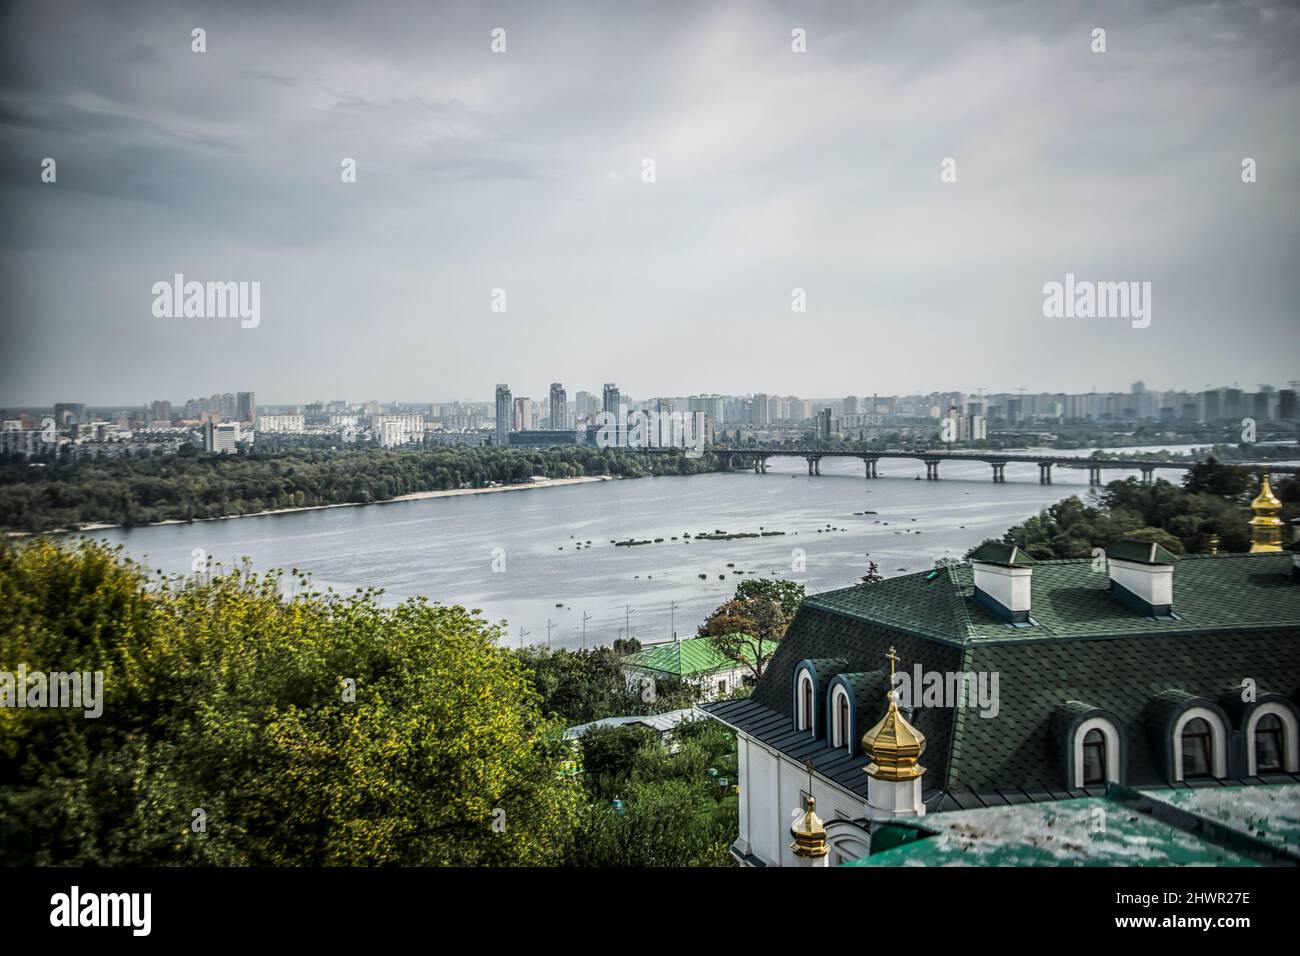 Panoramic view of Kiev with rooftops in the foreground and the river Dnieper in the background Stock Photo